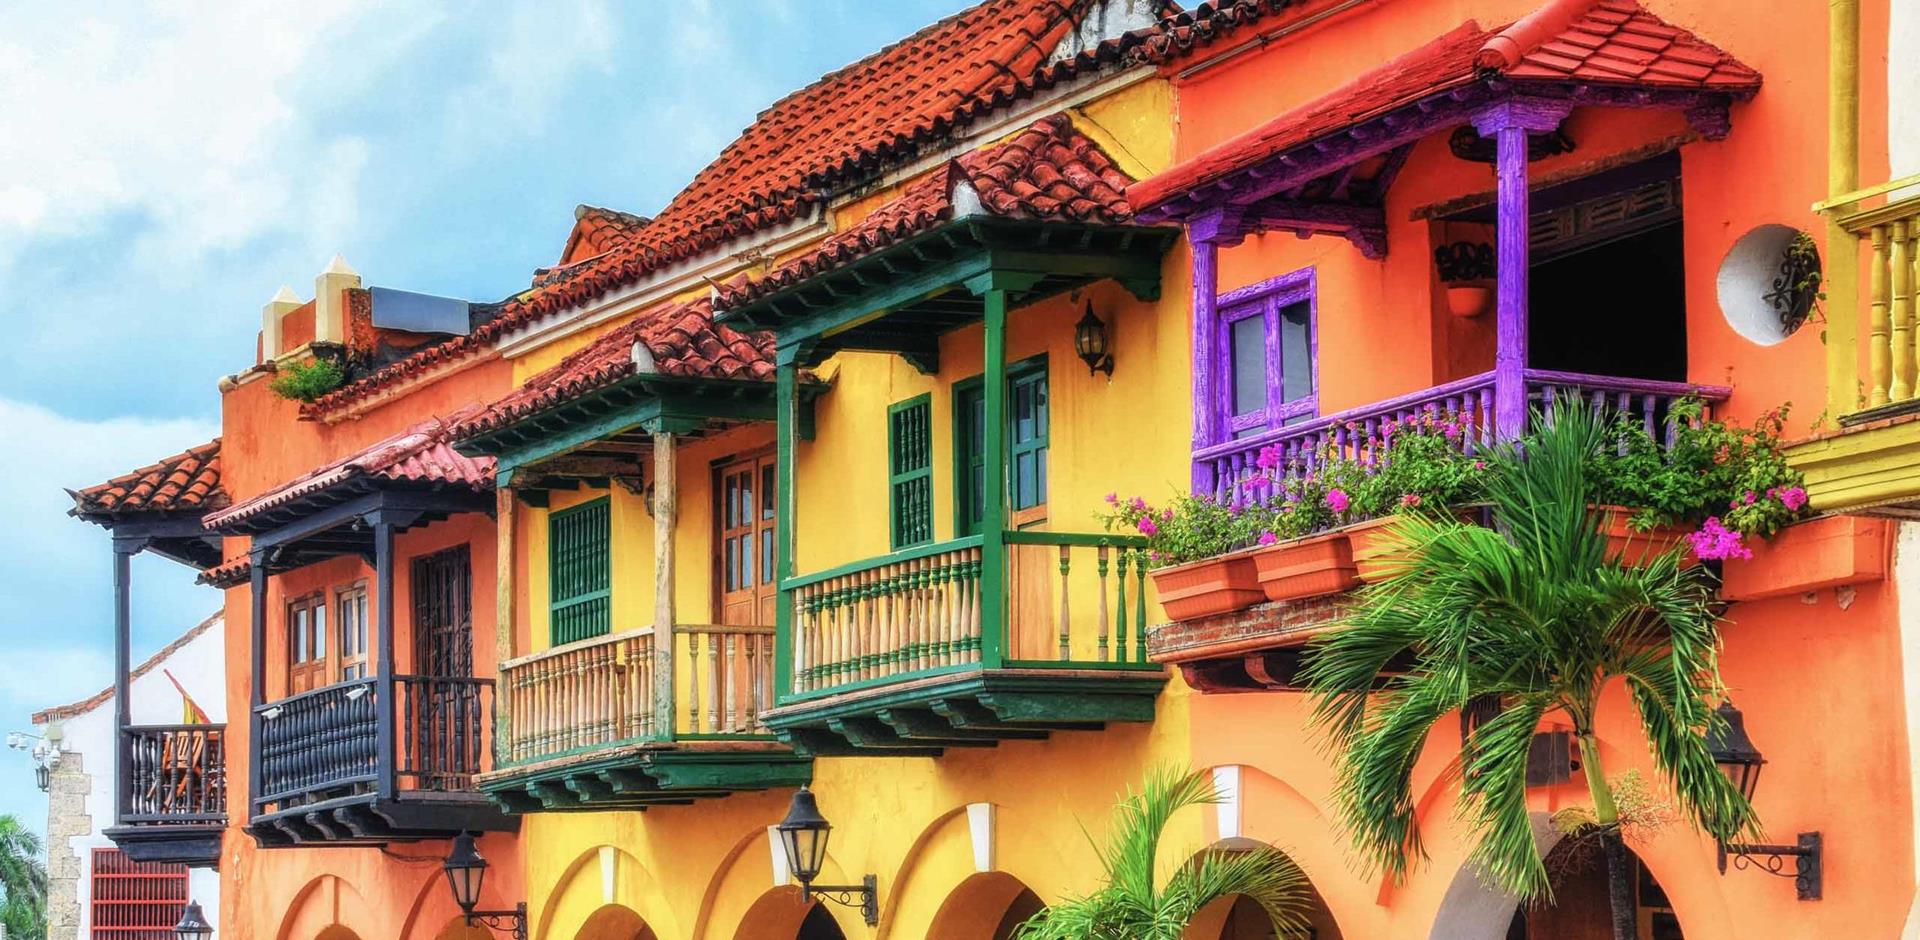 Housing in Cartagena, Colombia